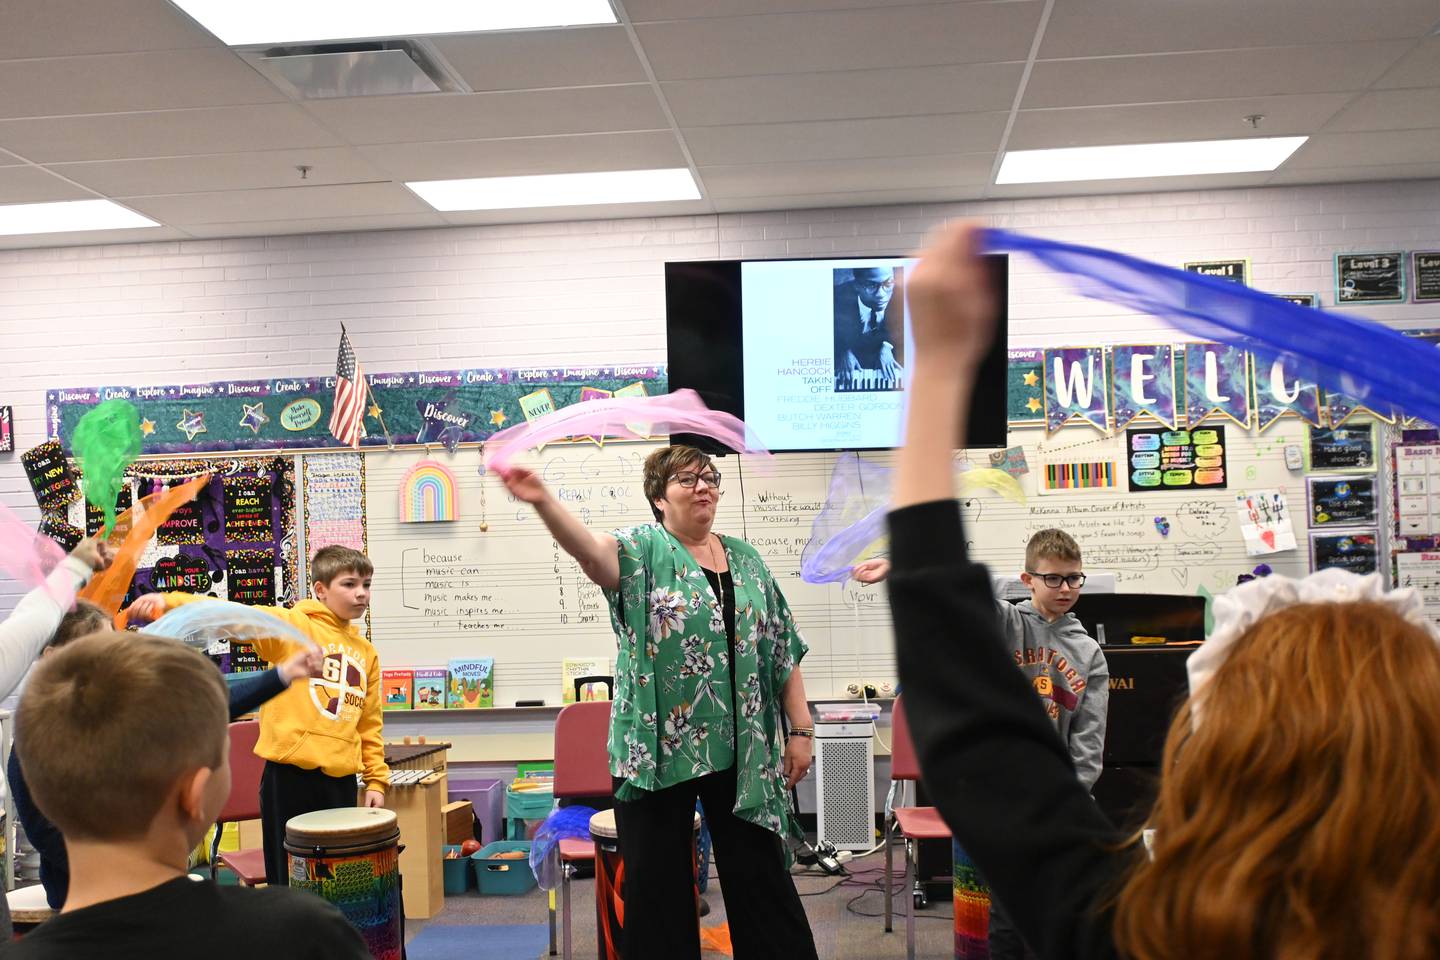 Recently, her class learned an African folk dance from Ghana. Her third-grade class stood in a circle in front of their drums, danced, and sang a song with hand gestures meaning “I keep you in my heart” and “I come in peace.”